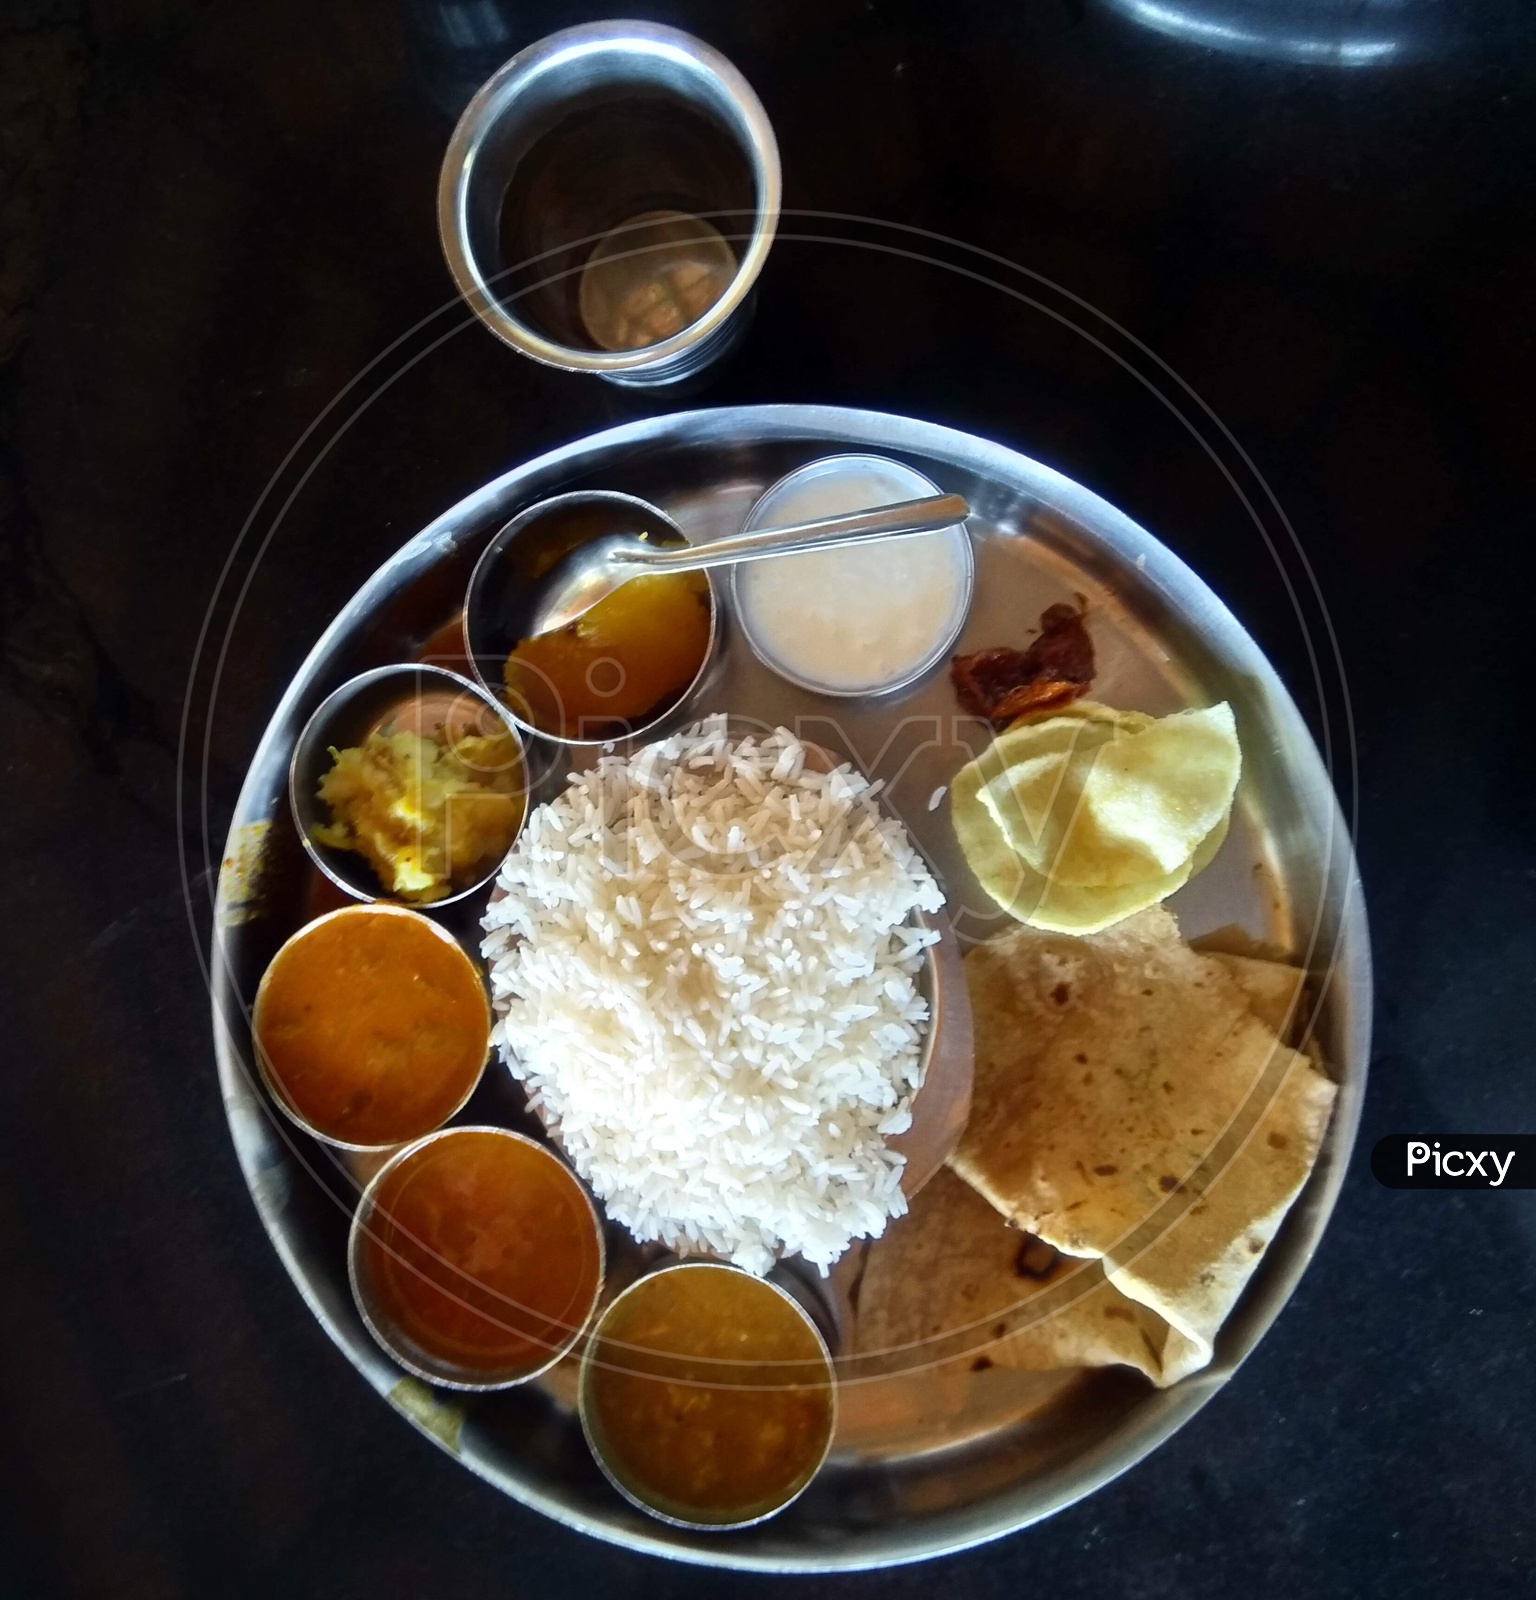 The traditional thali